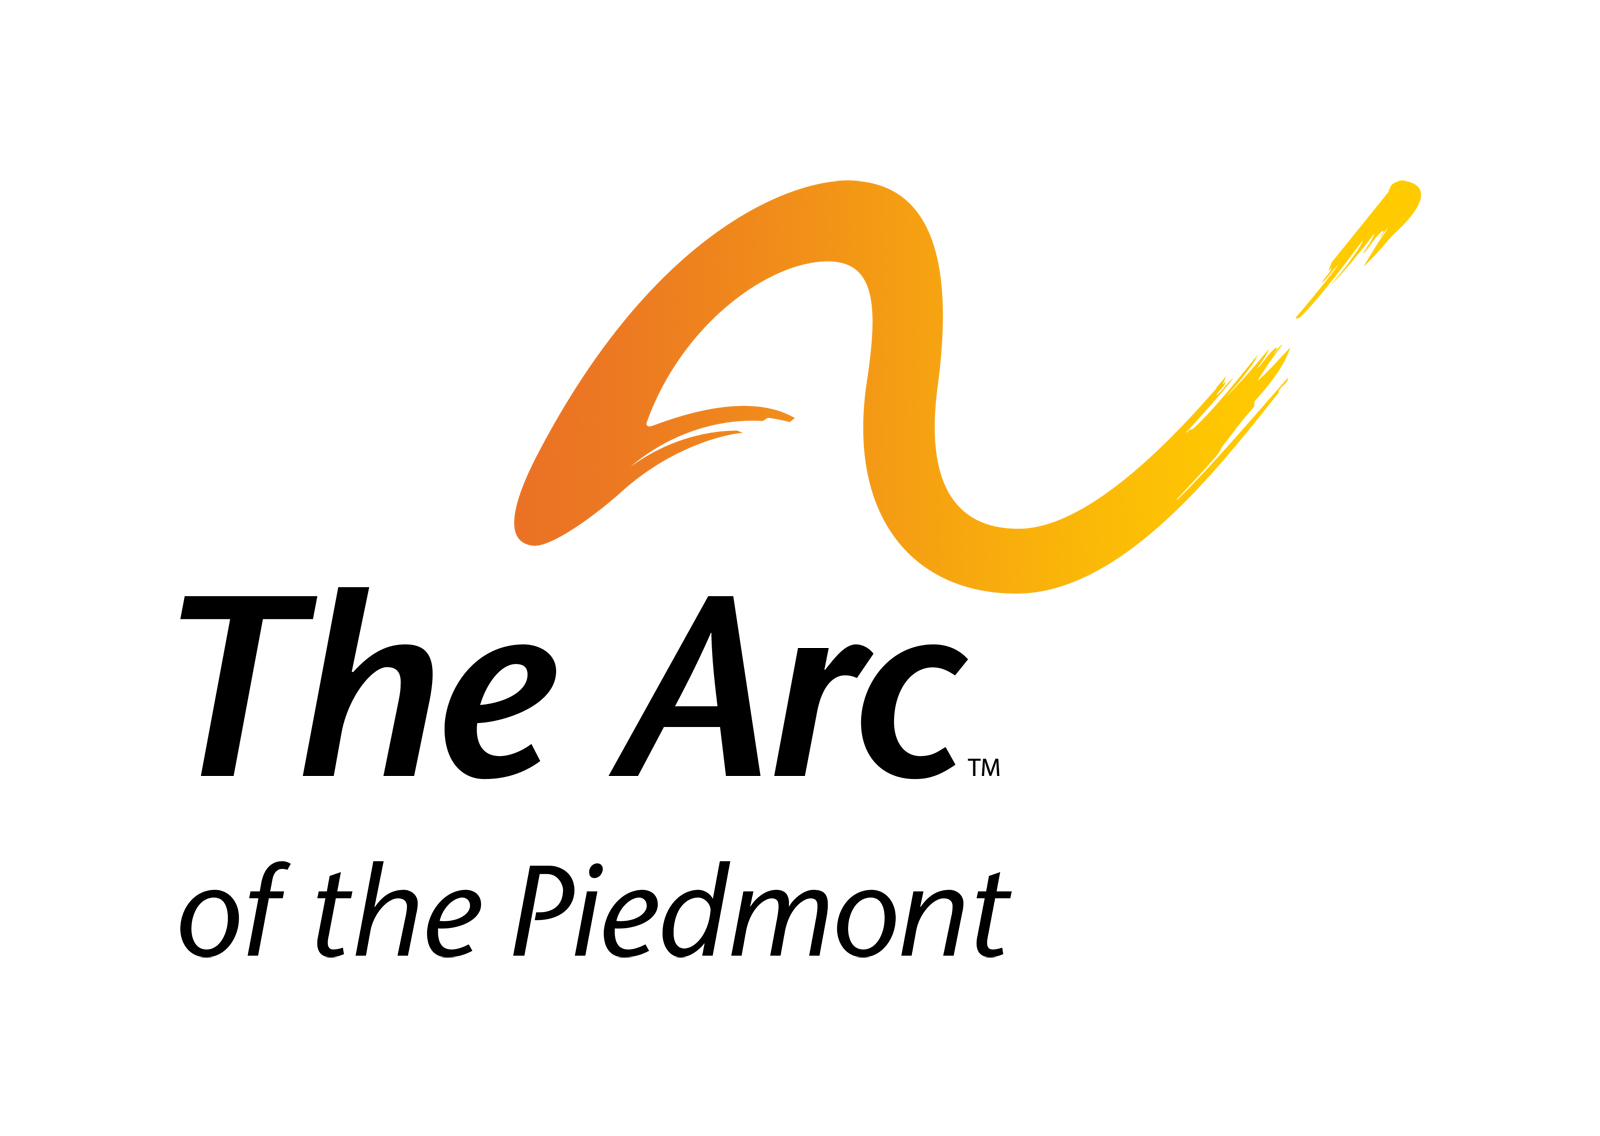 The Arc of the Piedmont